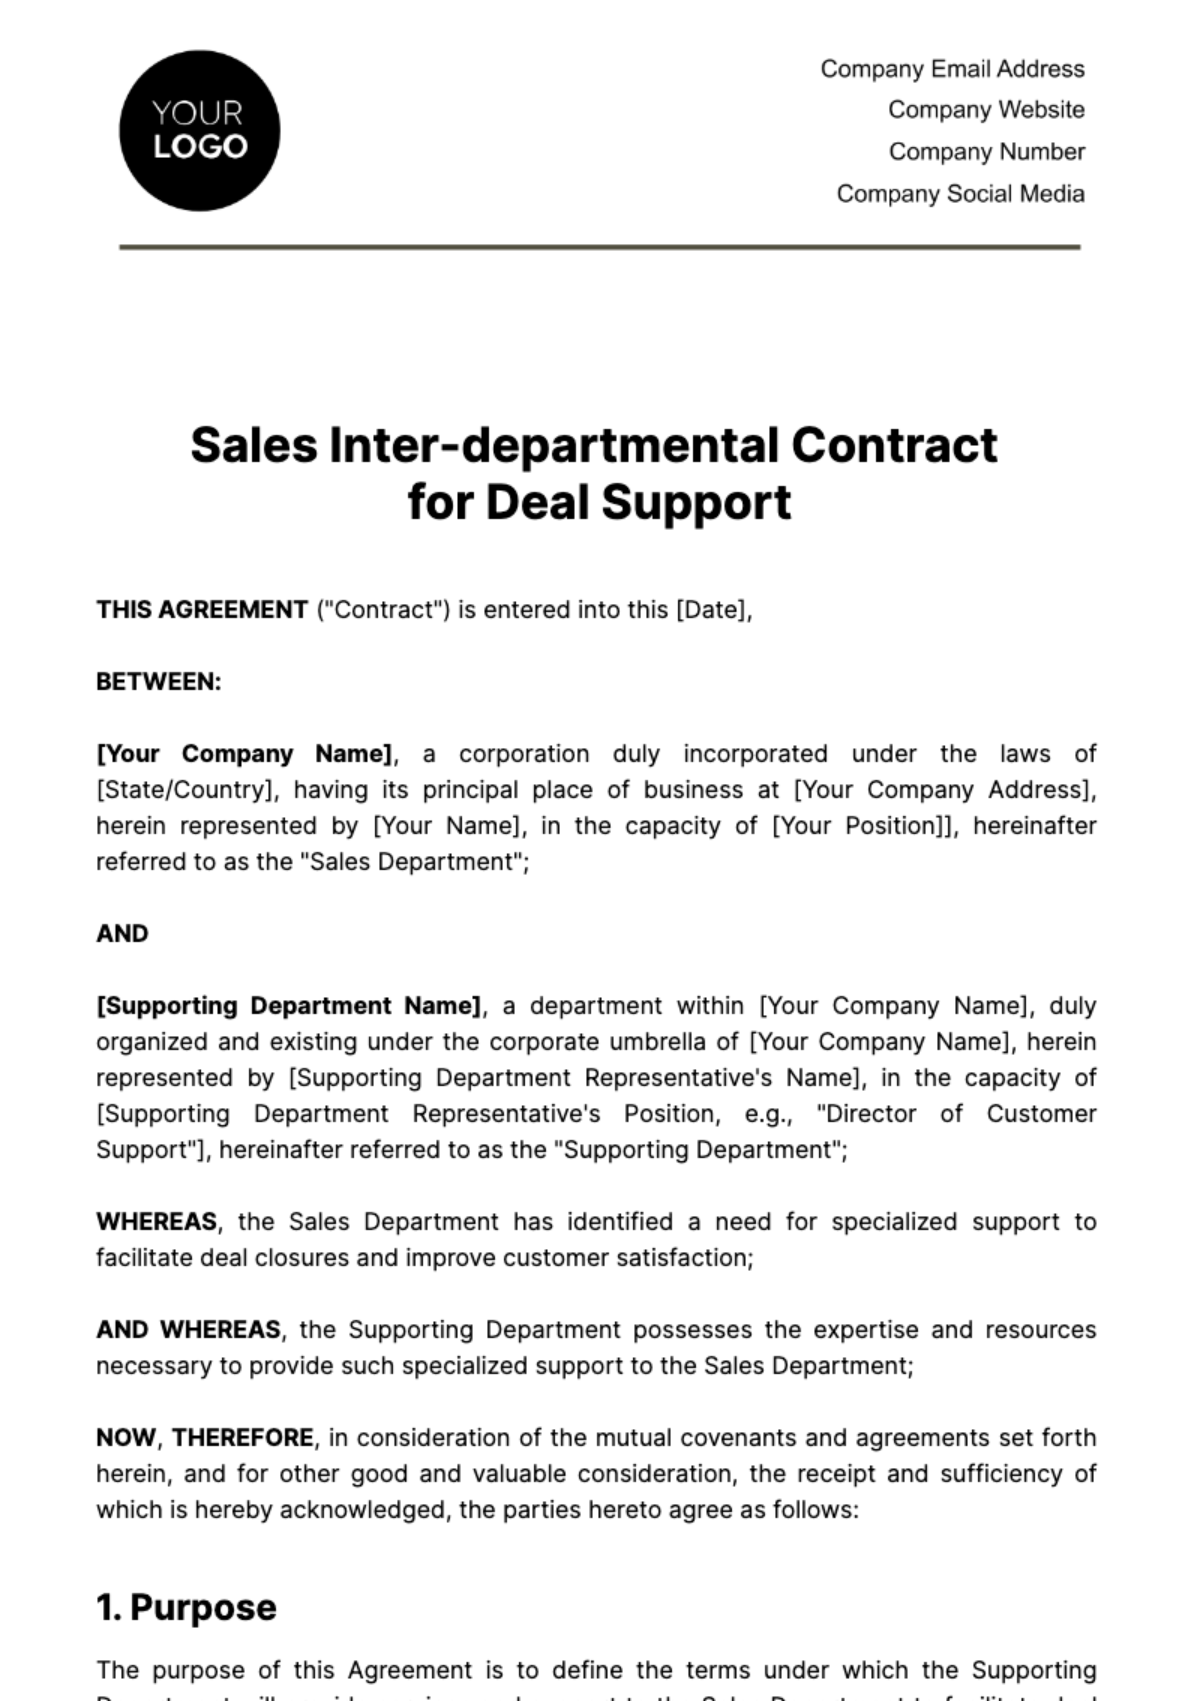 Free Sales Inter-departmental Contract for Deal Support Template